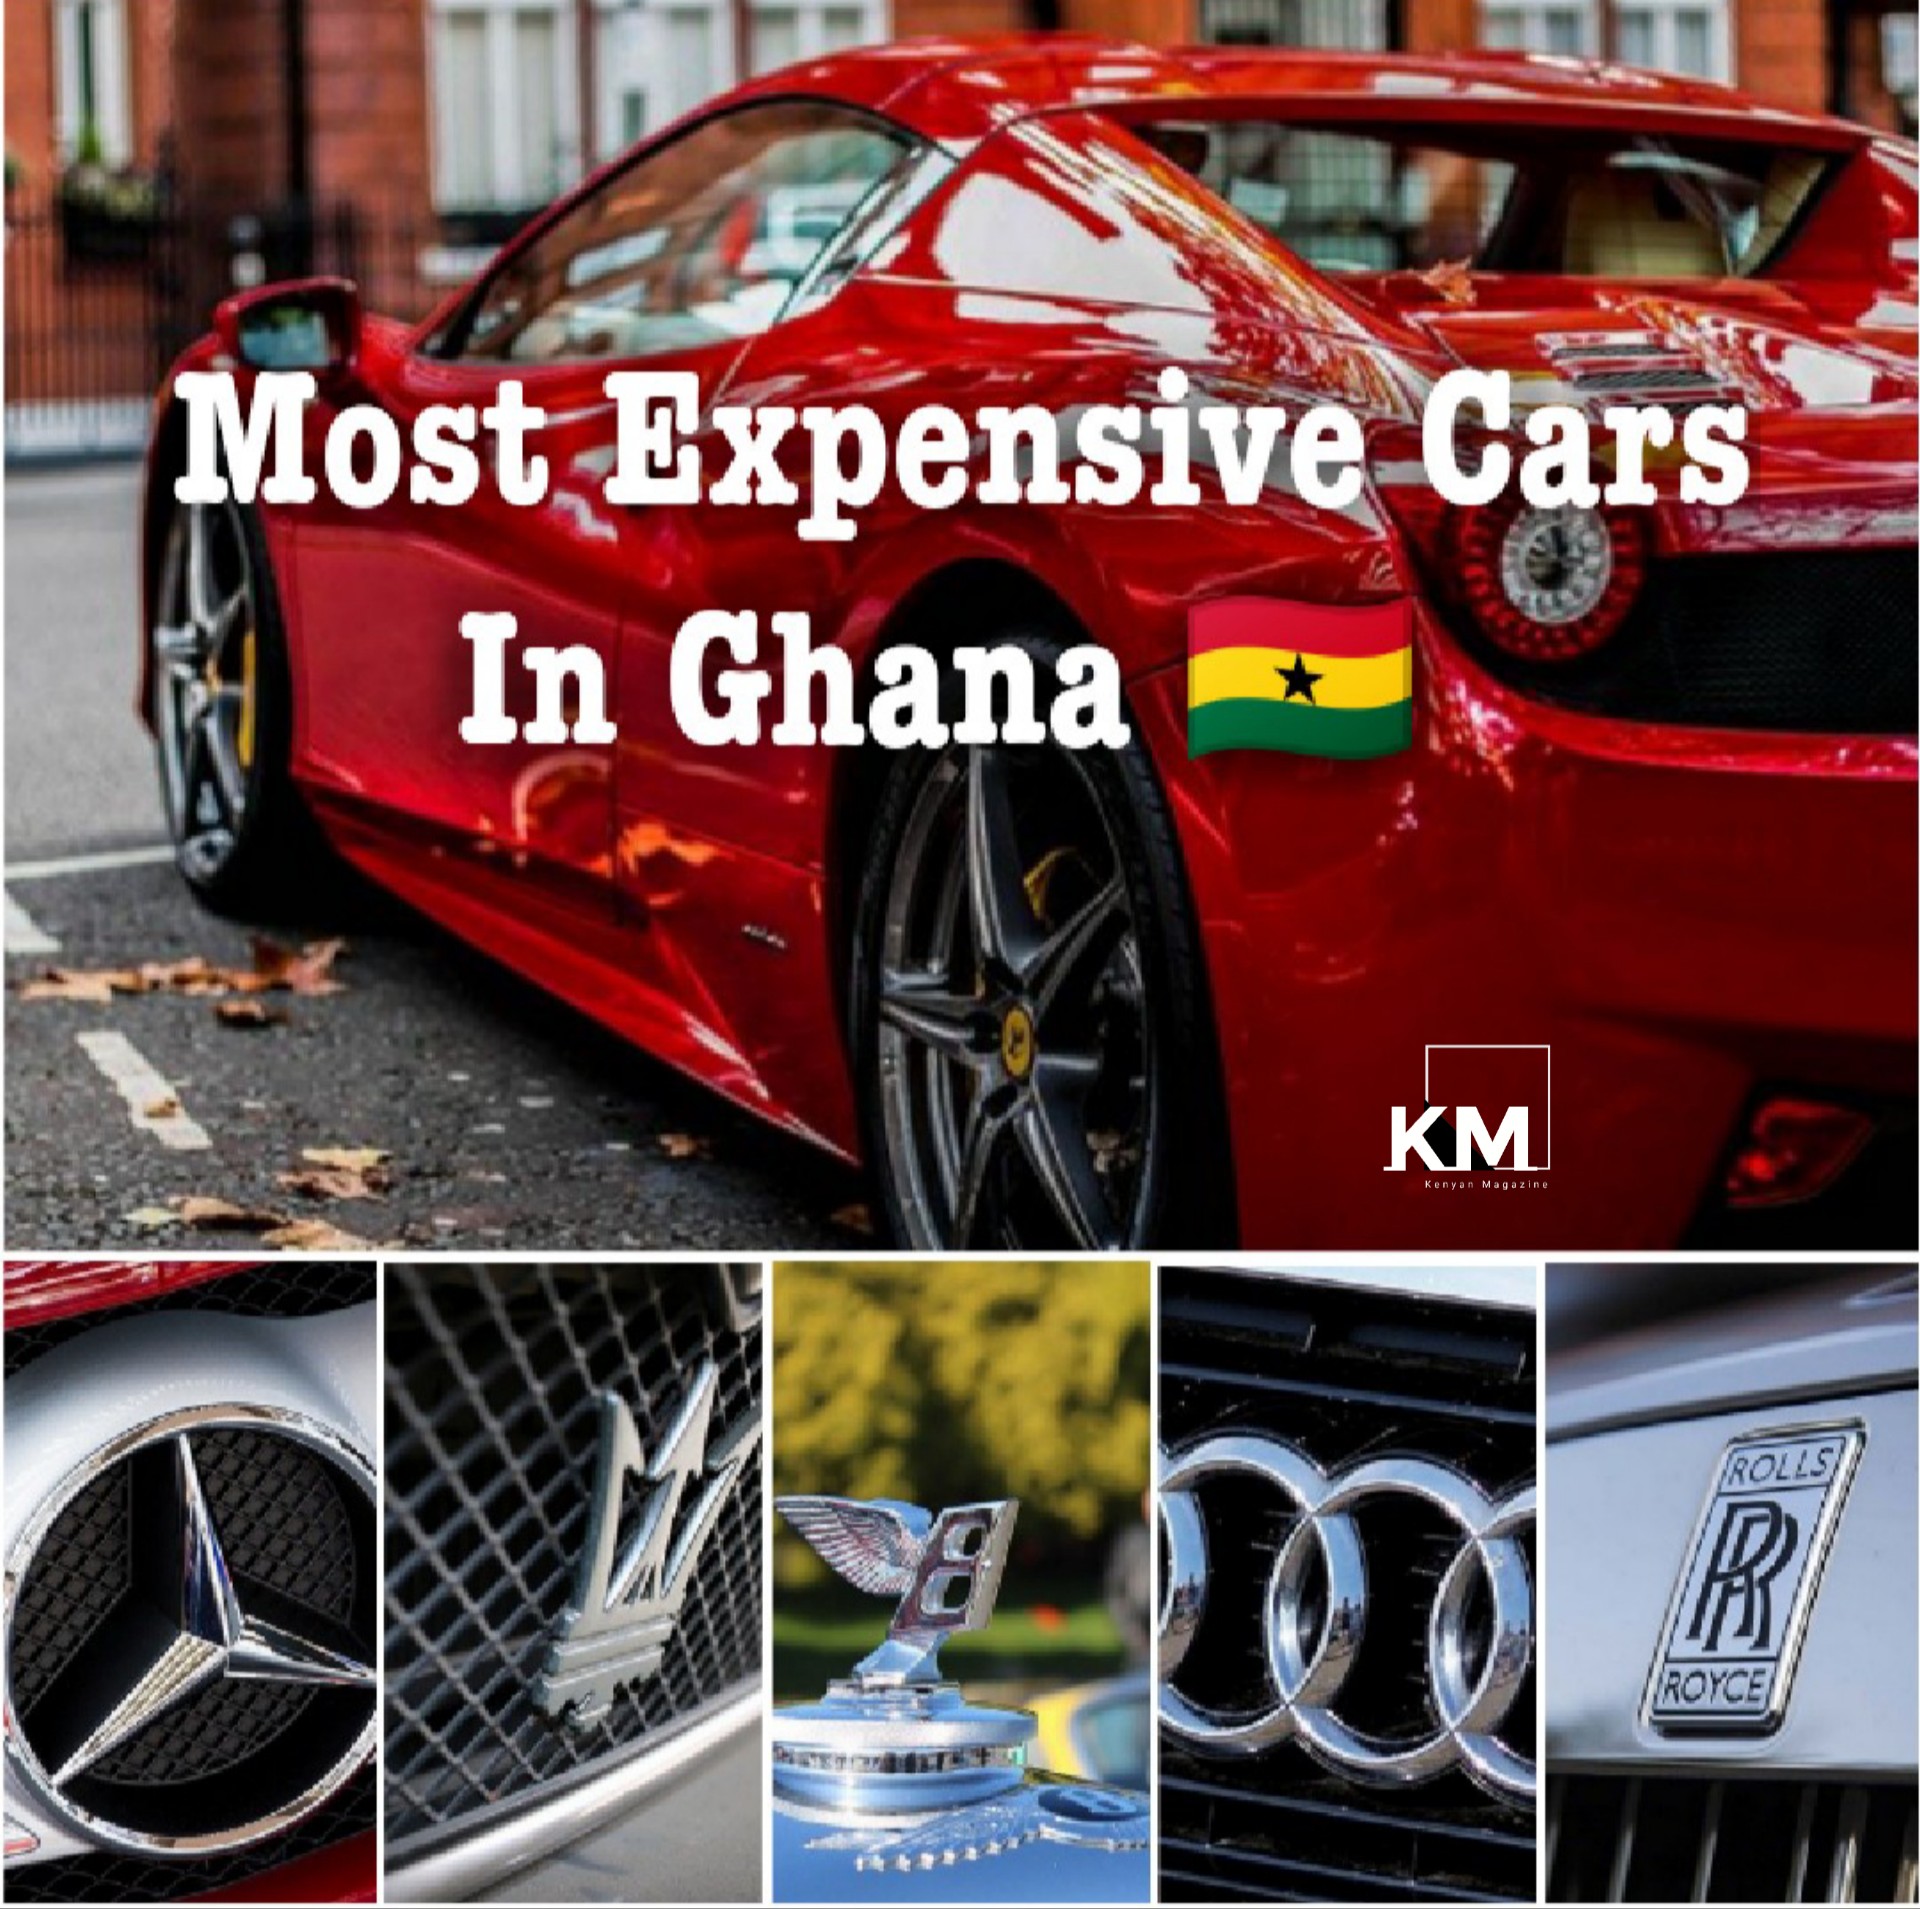 Expensive Cars In Ghana